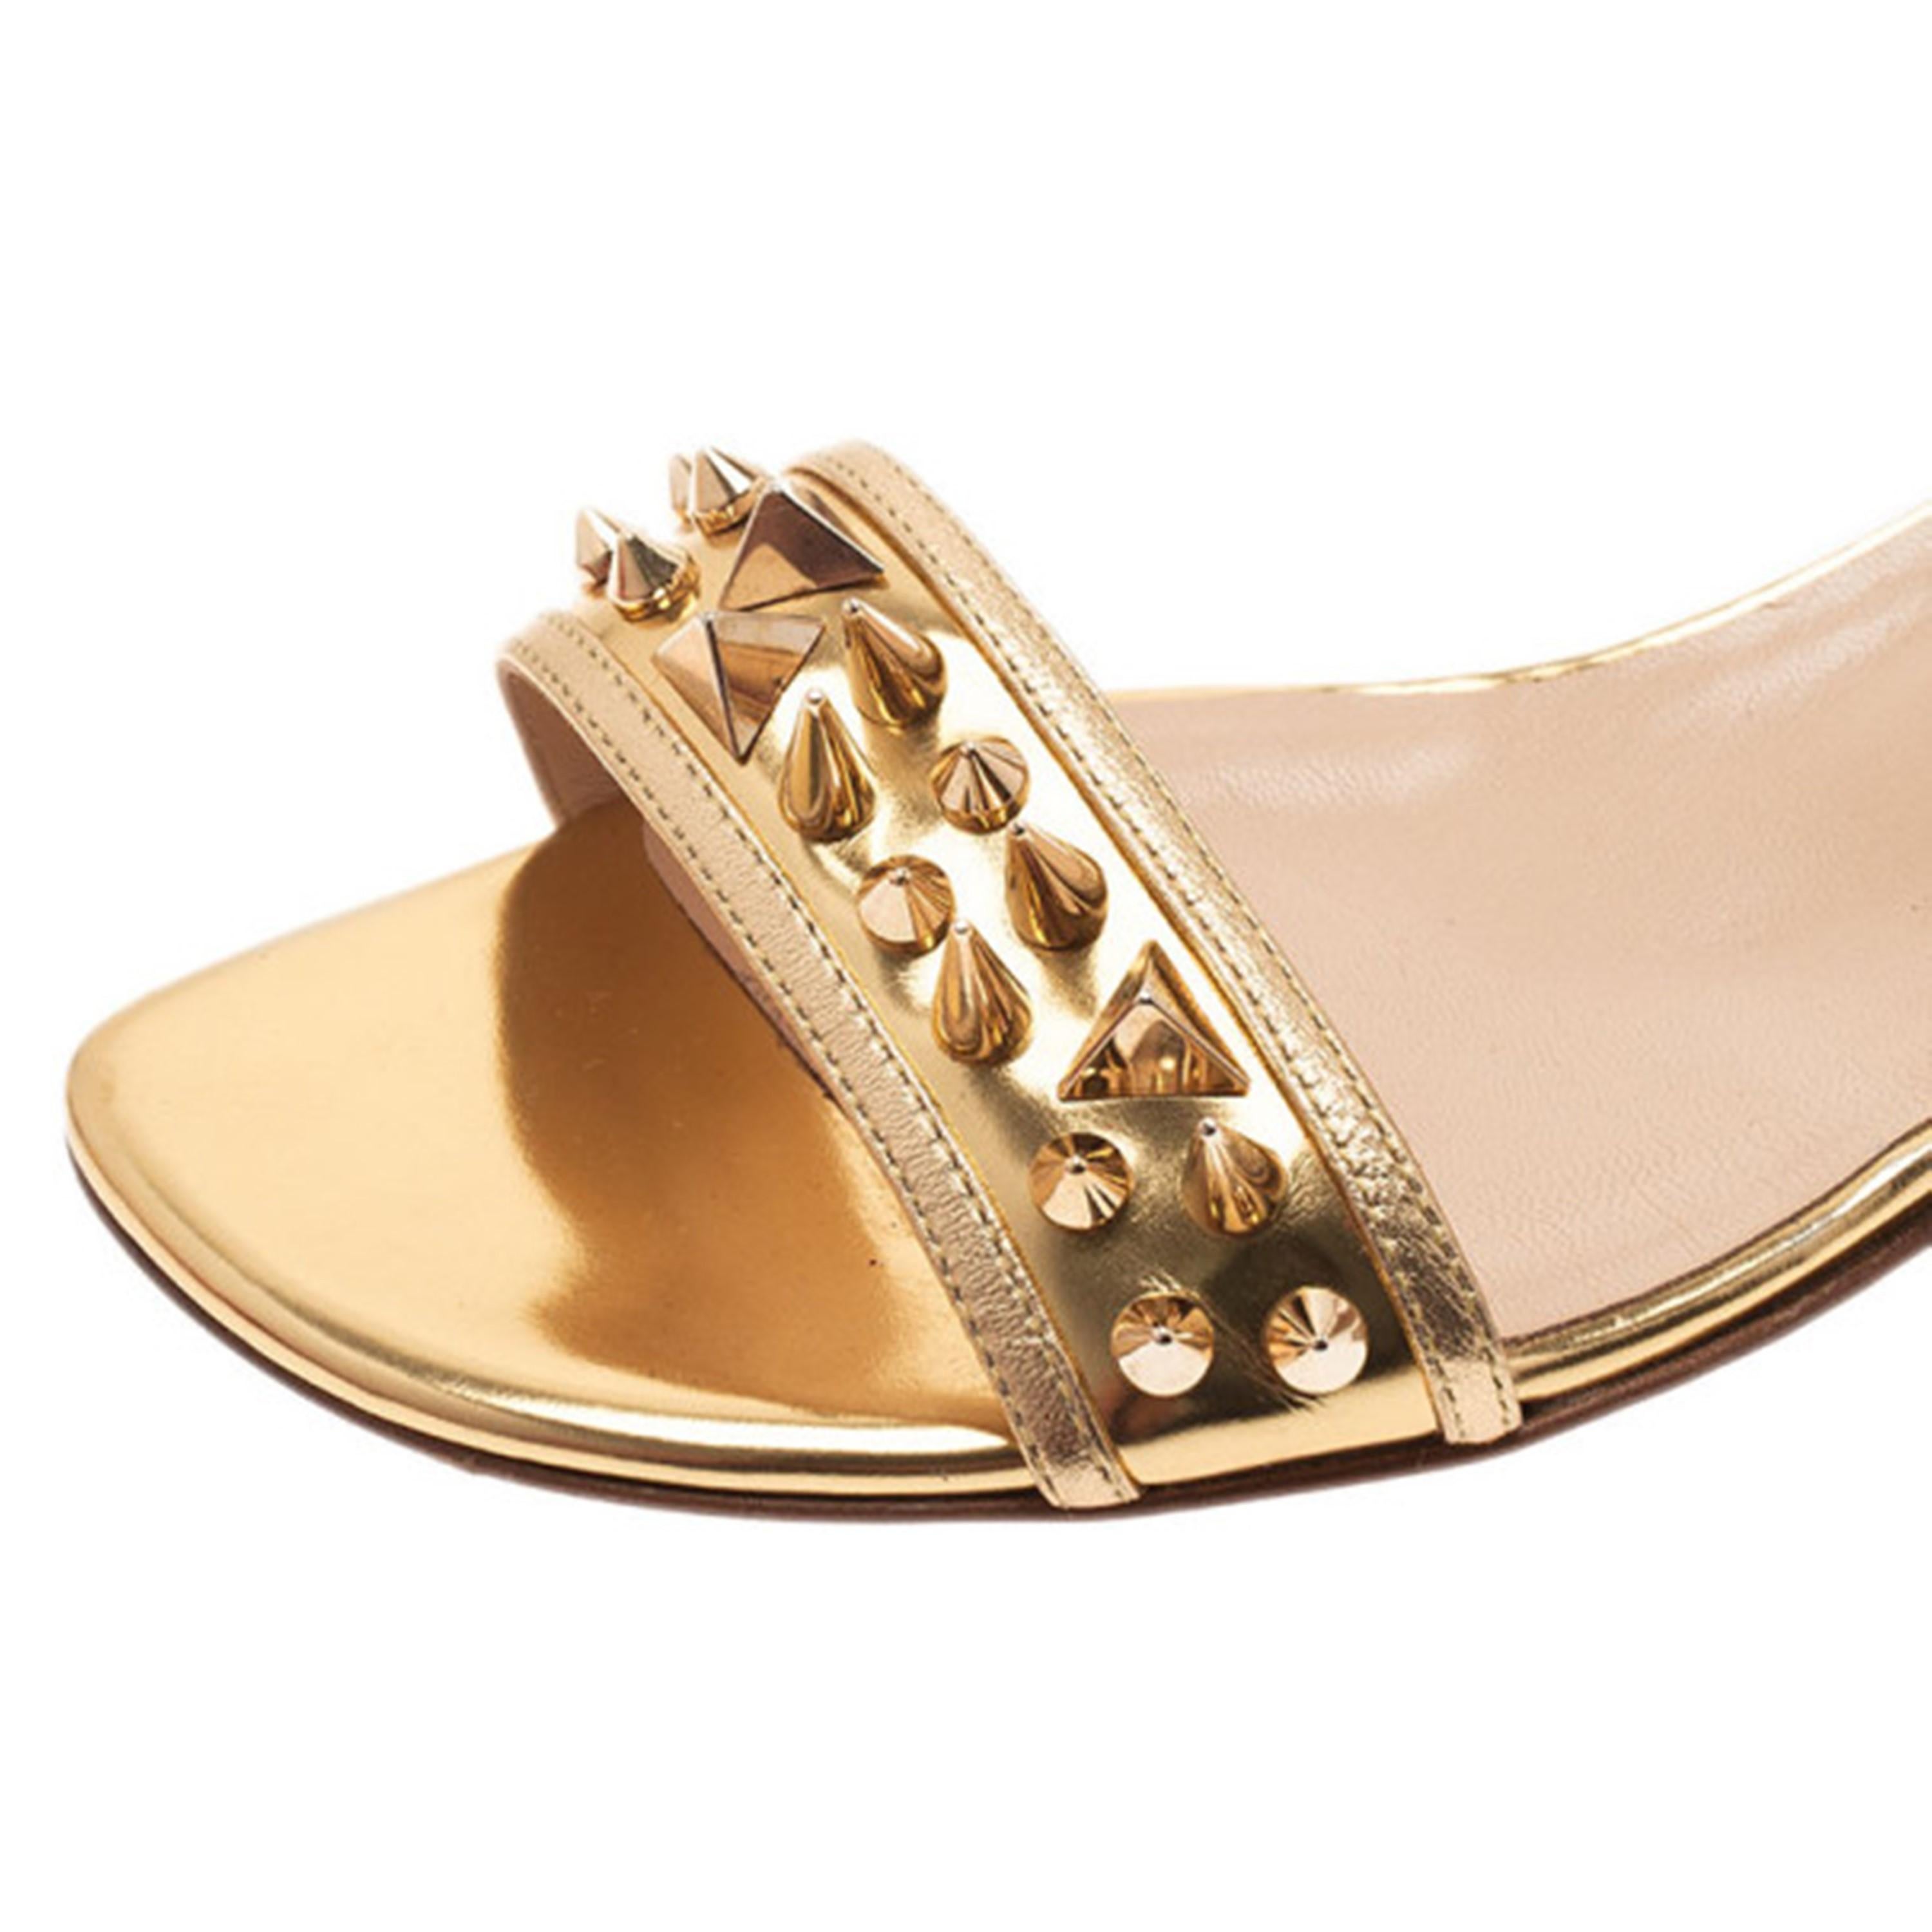 Women's Christian Louboutin Gold Spiked Leather Druide Sandals Size 38